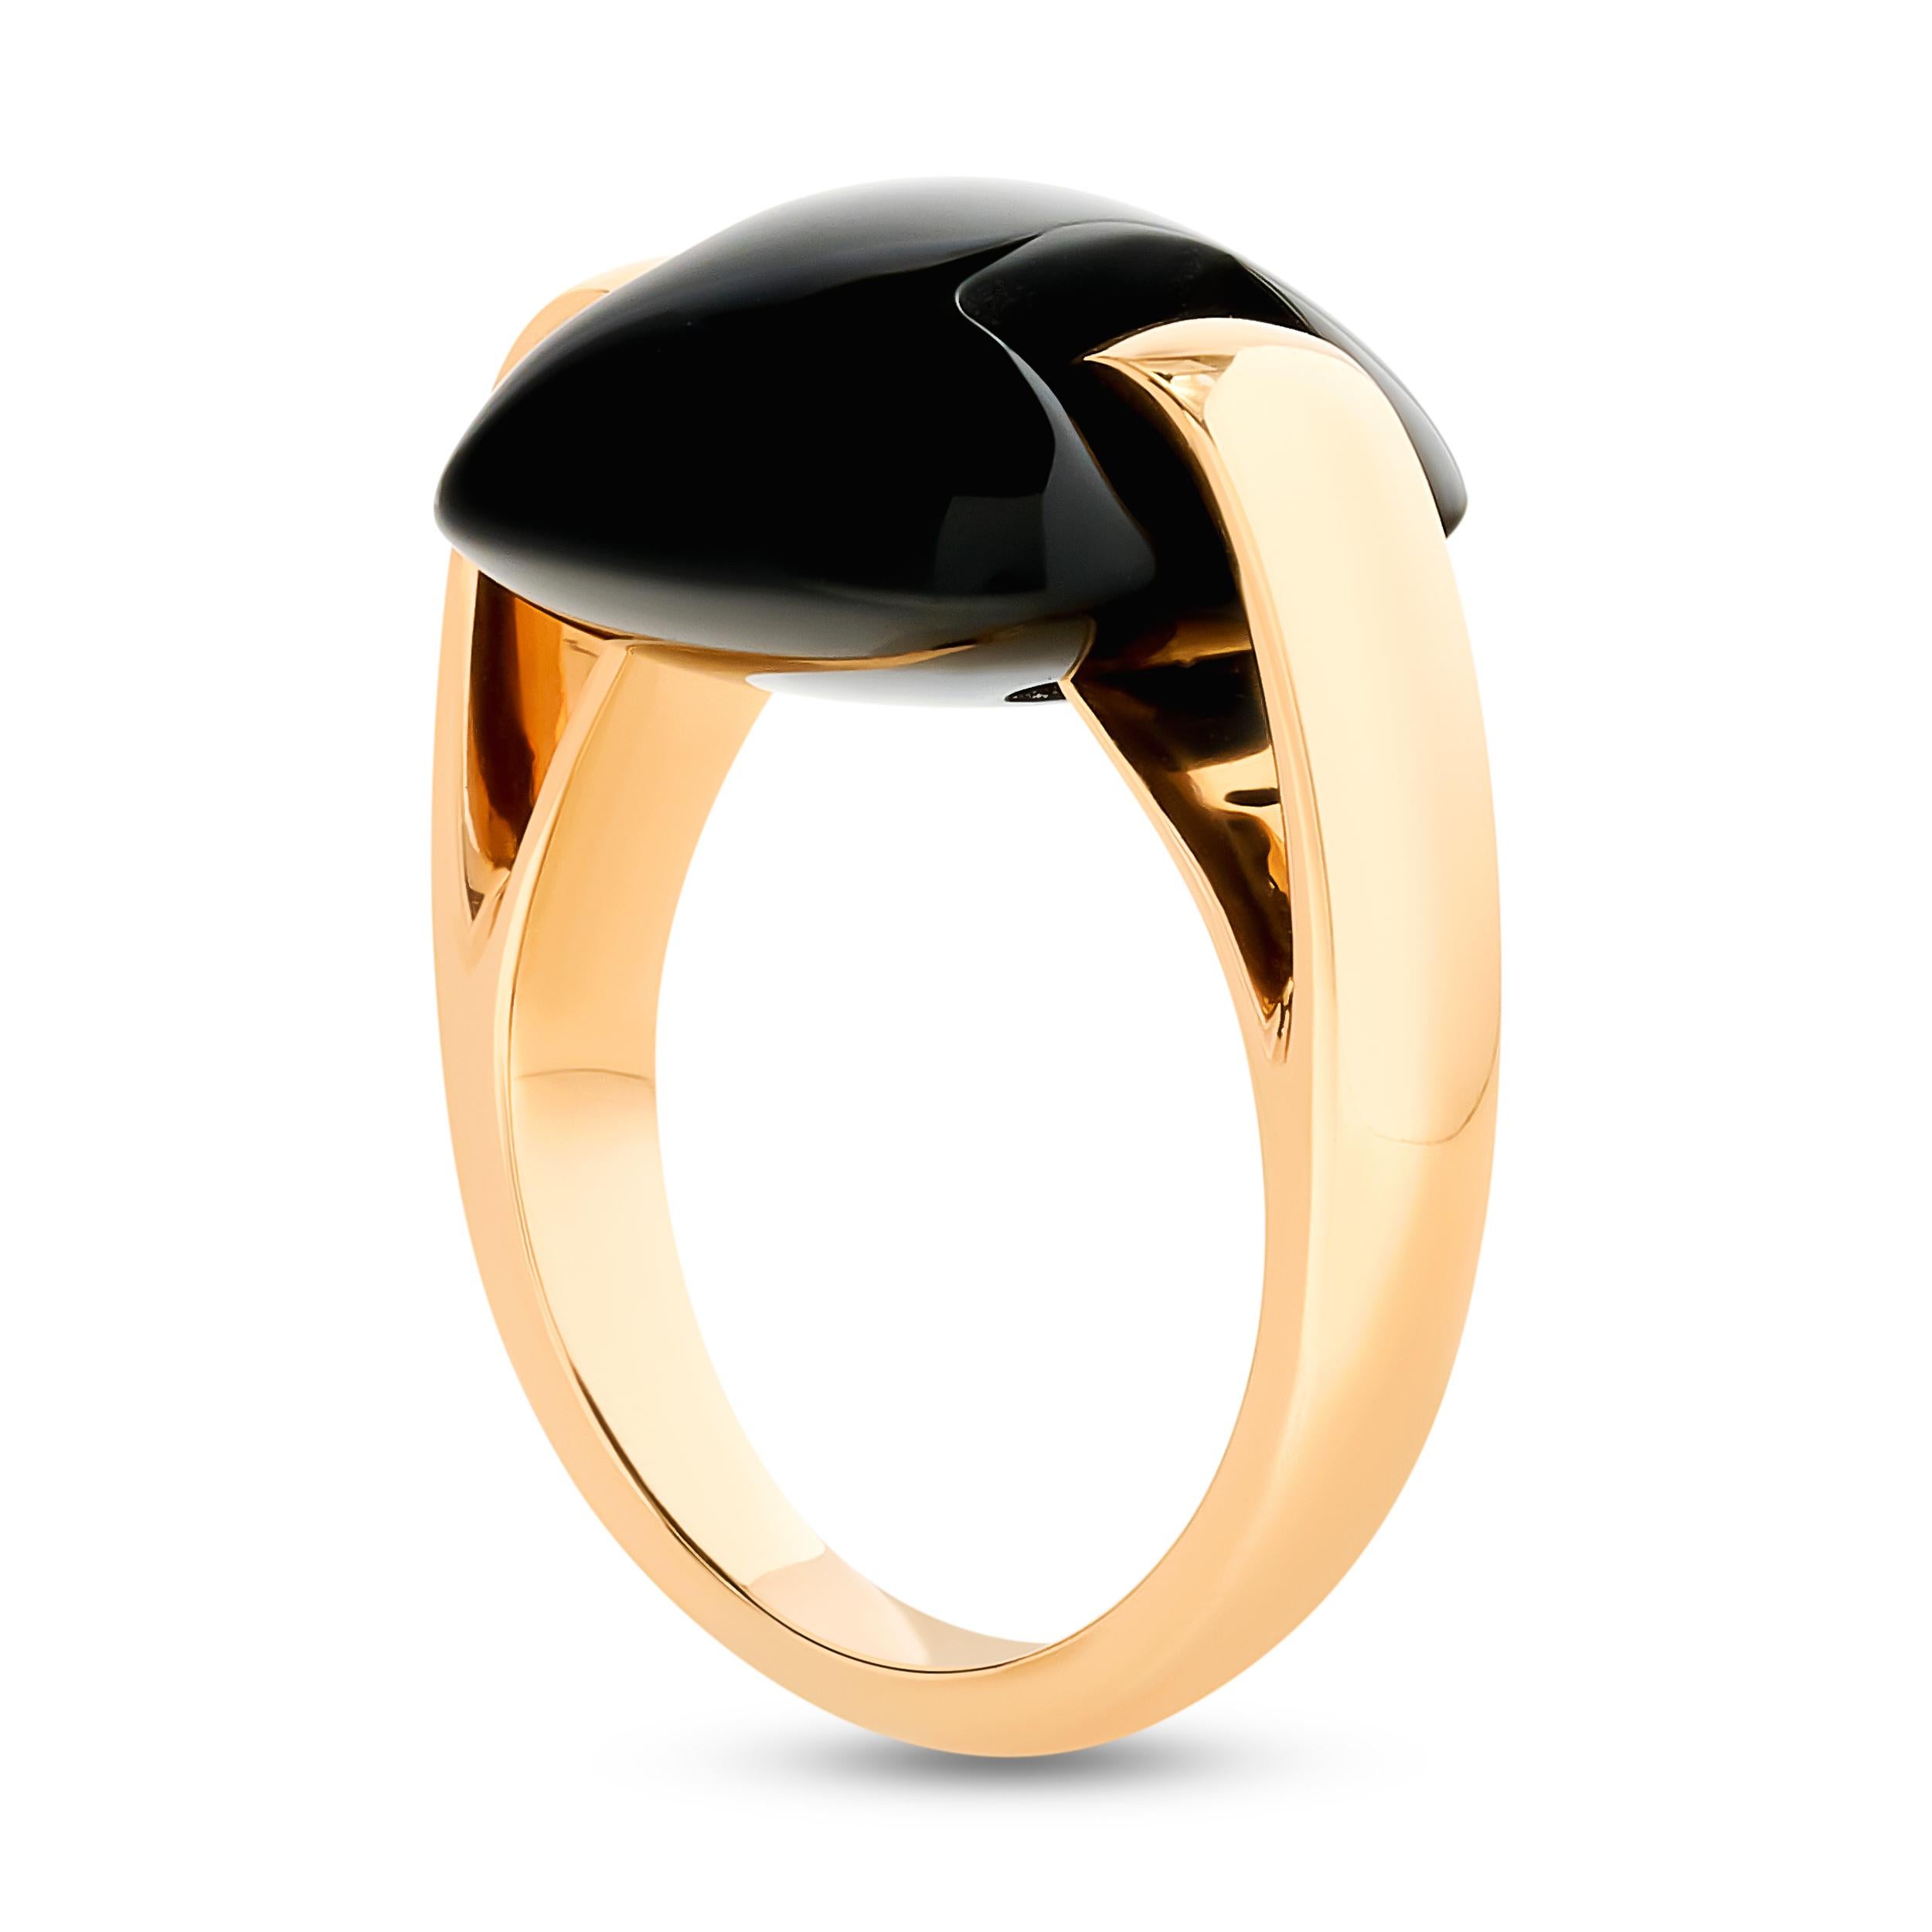 Crafted from luxurious 18k gold, the band is sleek and polished, showcasing Ferragamo's signature craftsmanship. 
The band interlocks with a black onyx gemstone.

Ring size US 4.50
Signed with the Ferragamo and 18k stamps.
Ferragamo retail: $2,200